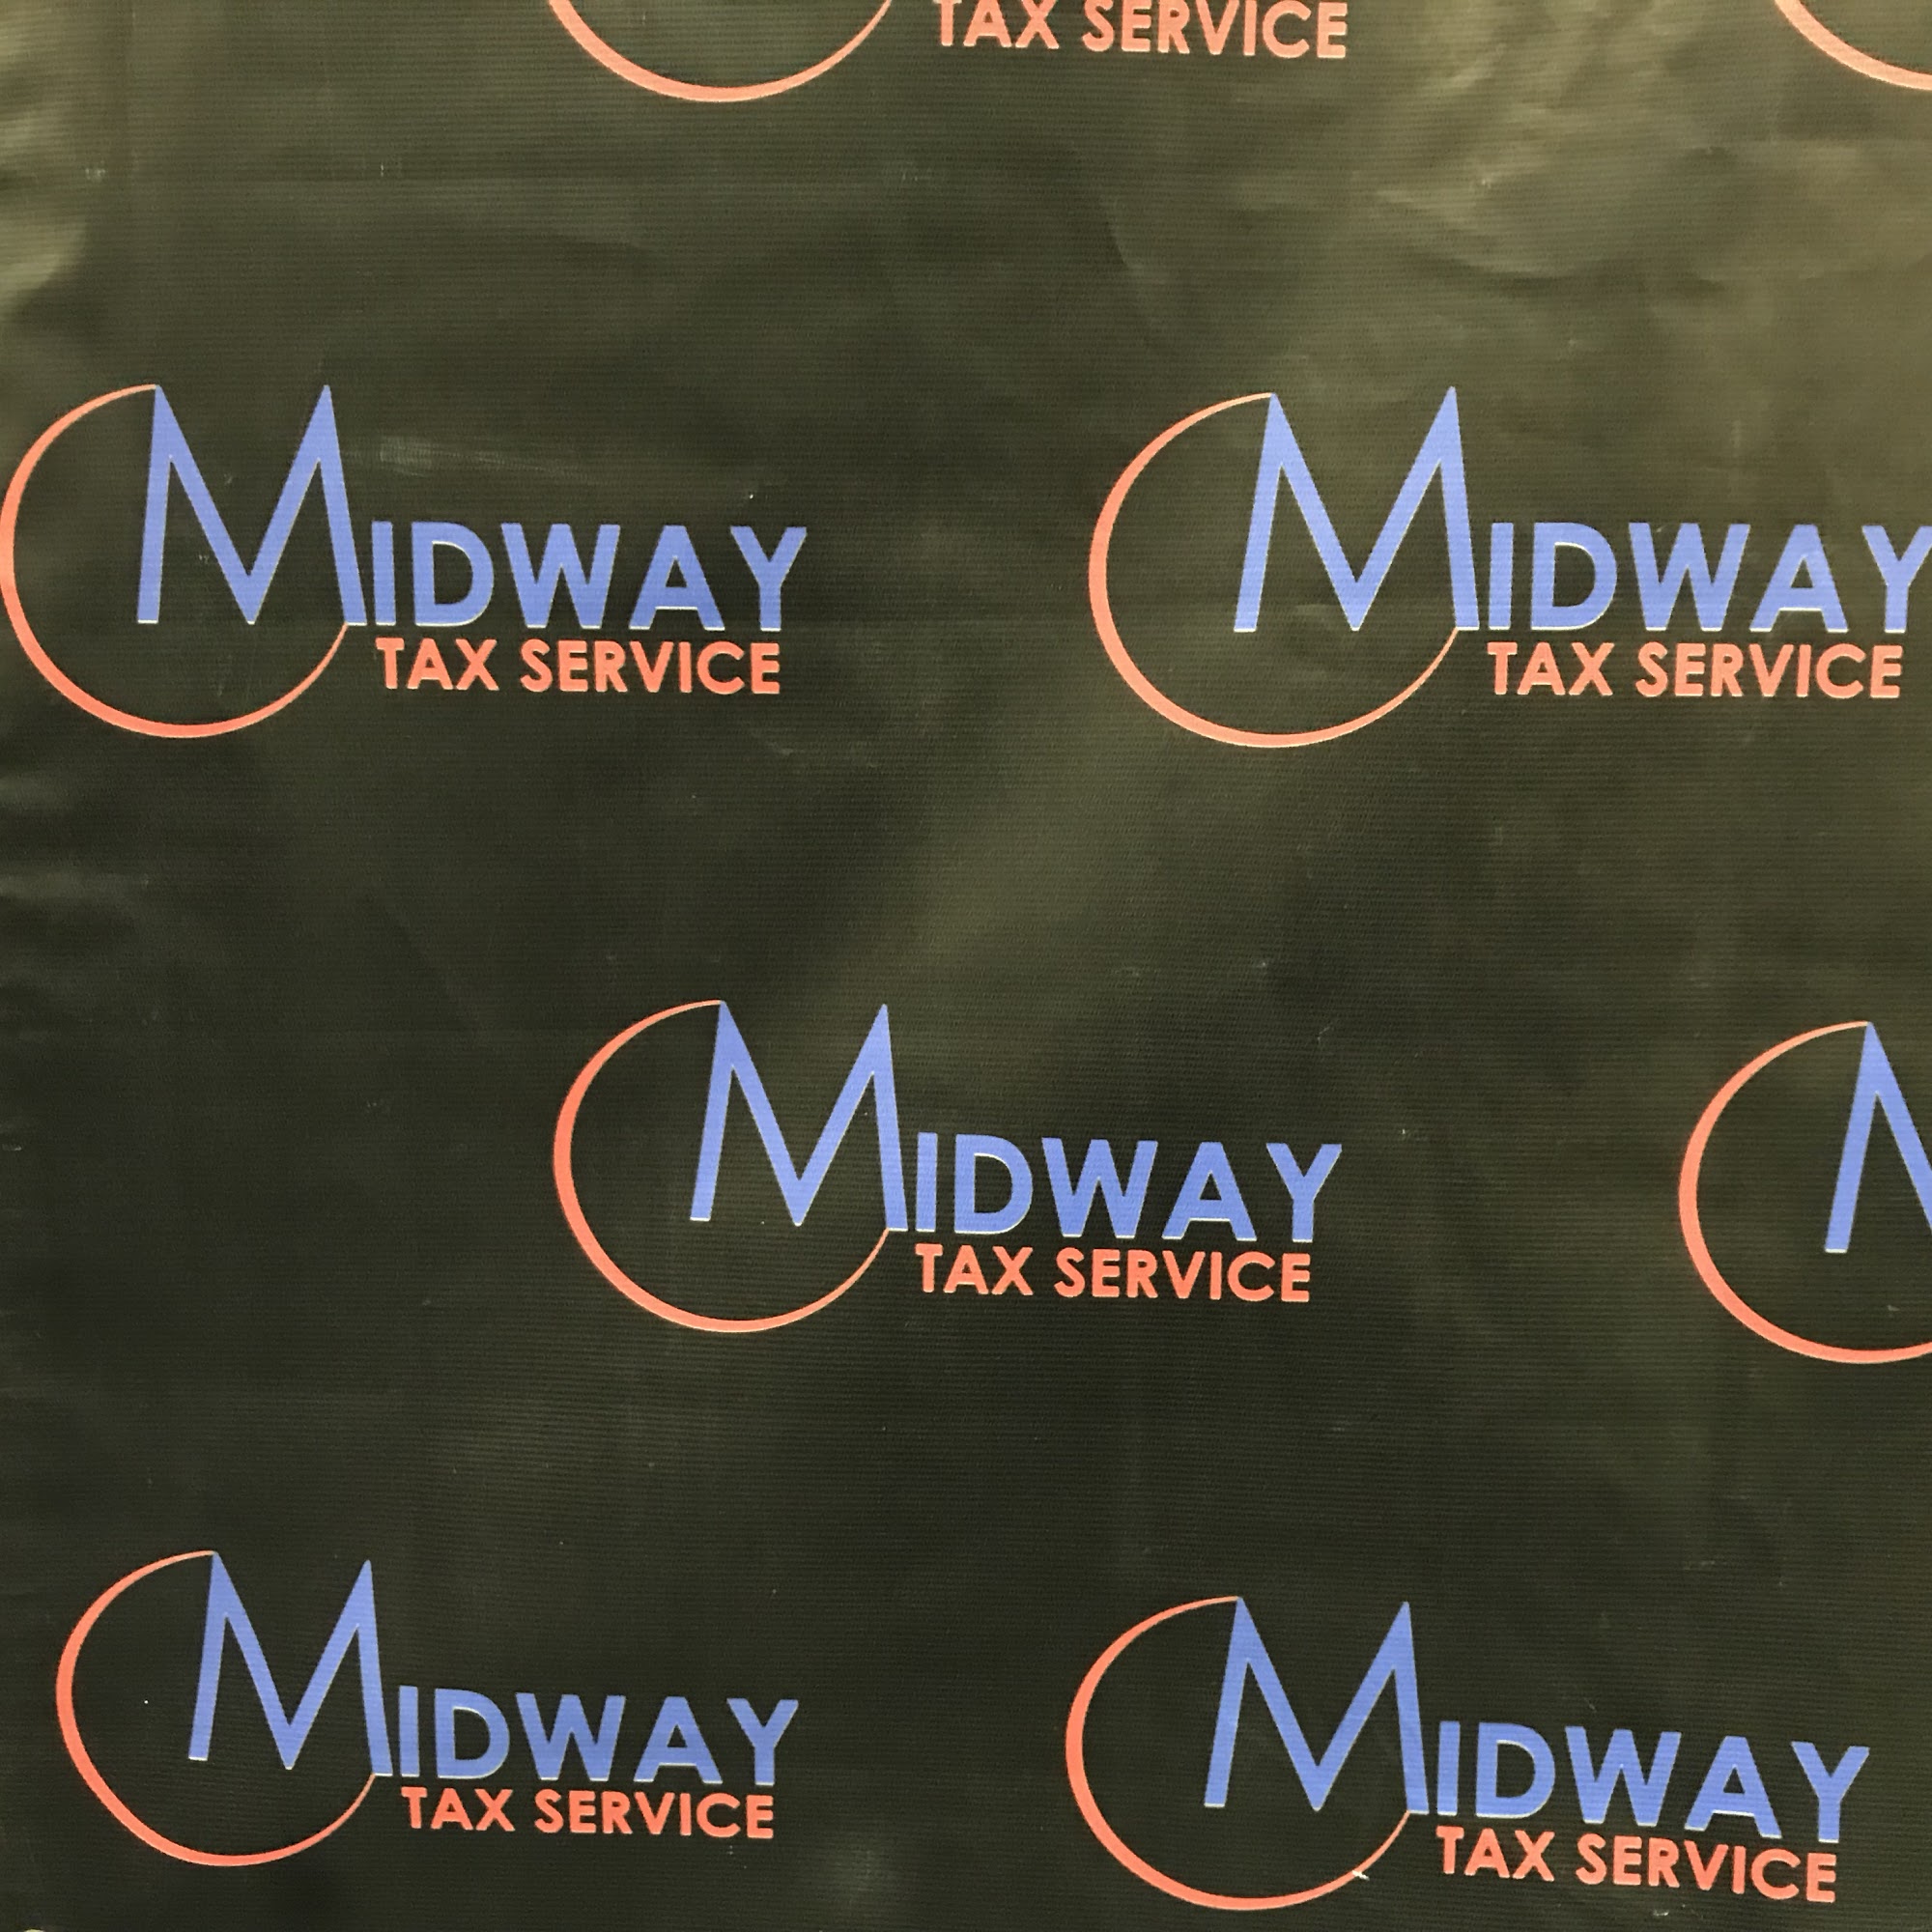 Midway Tax Service